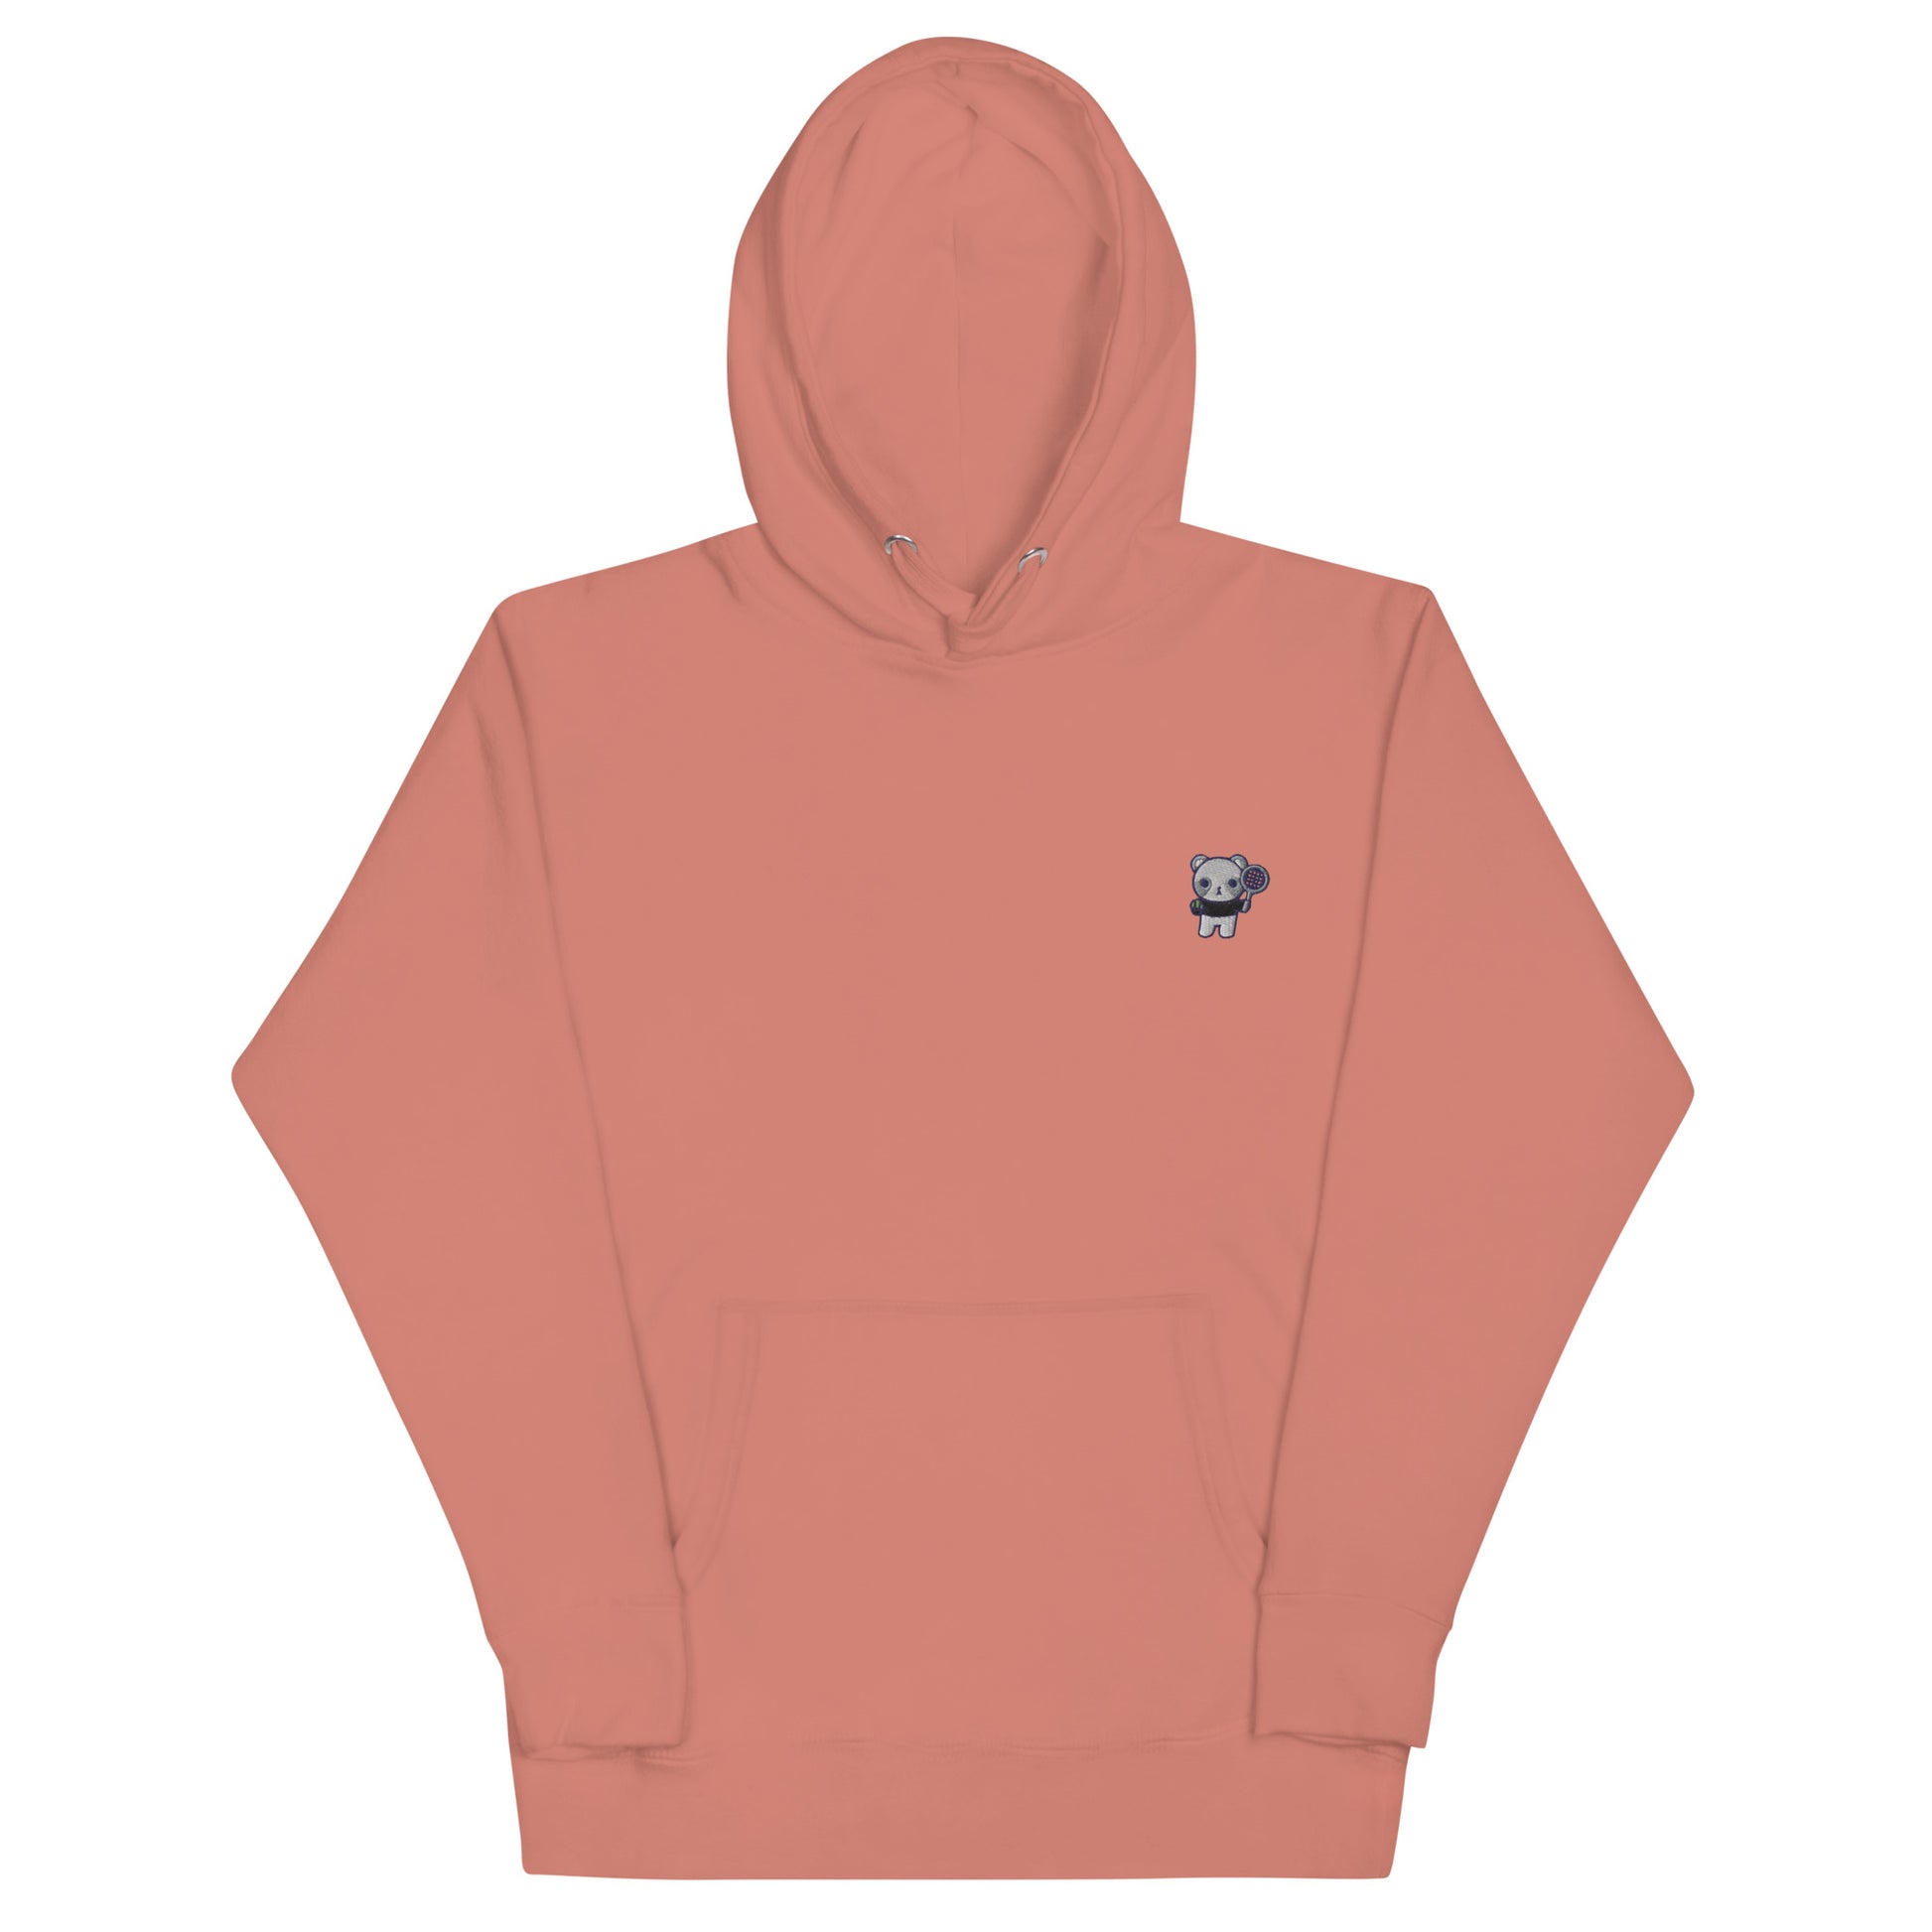 ADULT UNISEX HENRI HOODIE - EMBROIDERED LOGO - AVAILABLE IN 10 COLORS - TOKKITENNIS